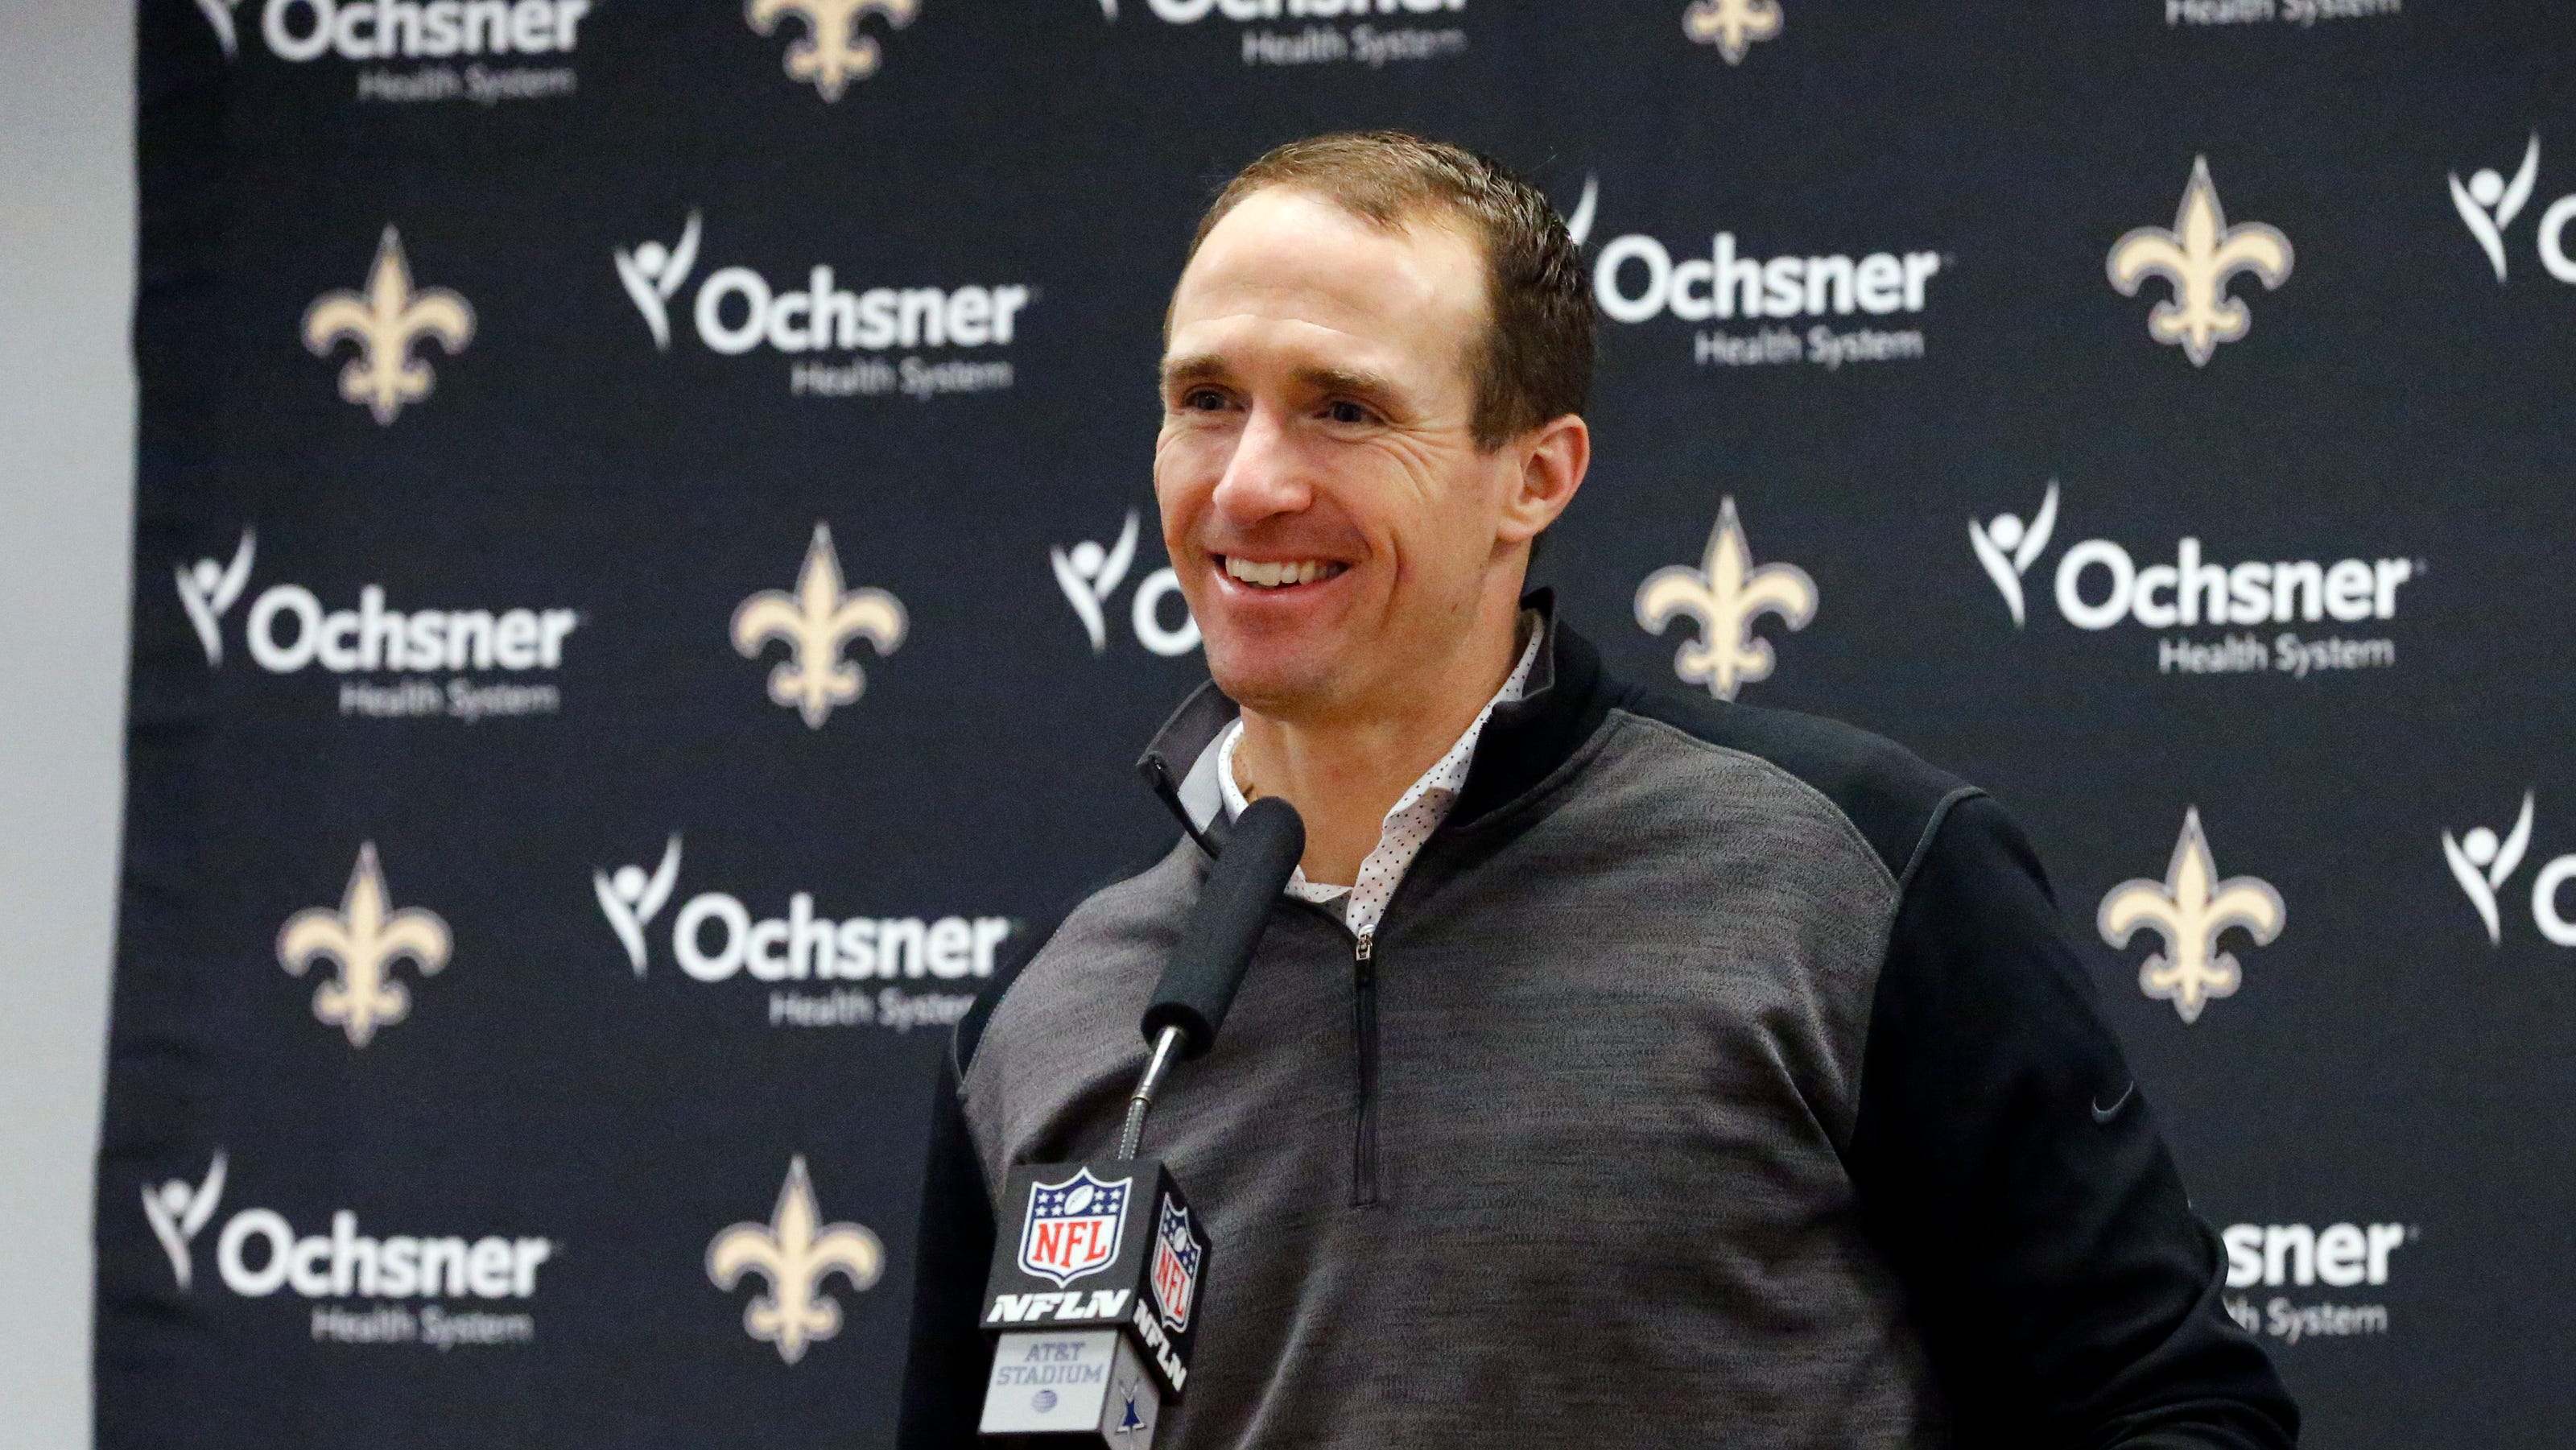 What's next for retired Drew Brees? NBC Sports studio analyst, Notre